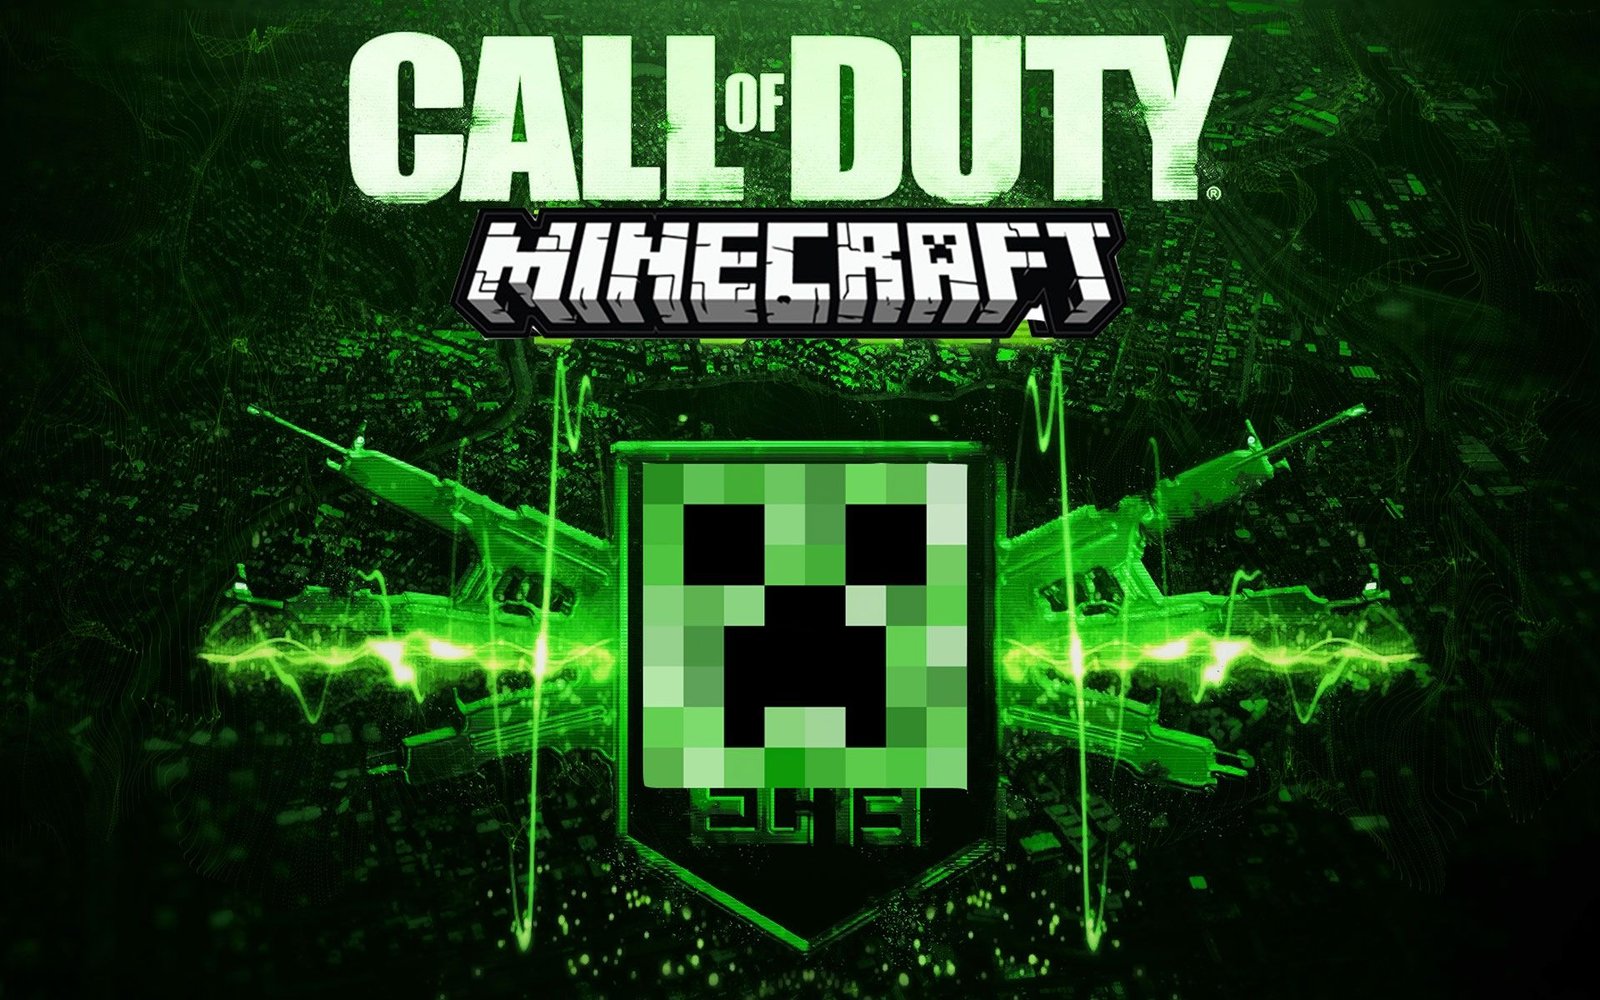 Aesthetic Minecraft wallpapers